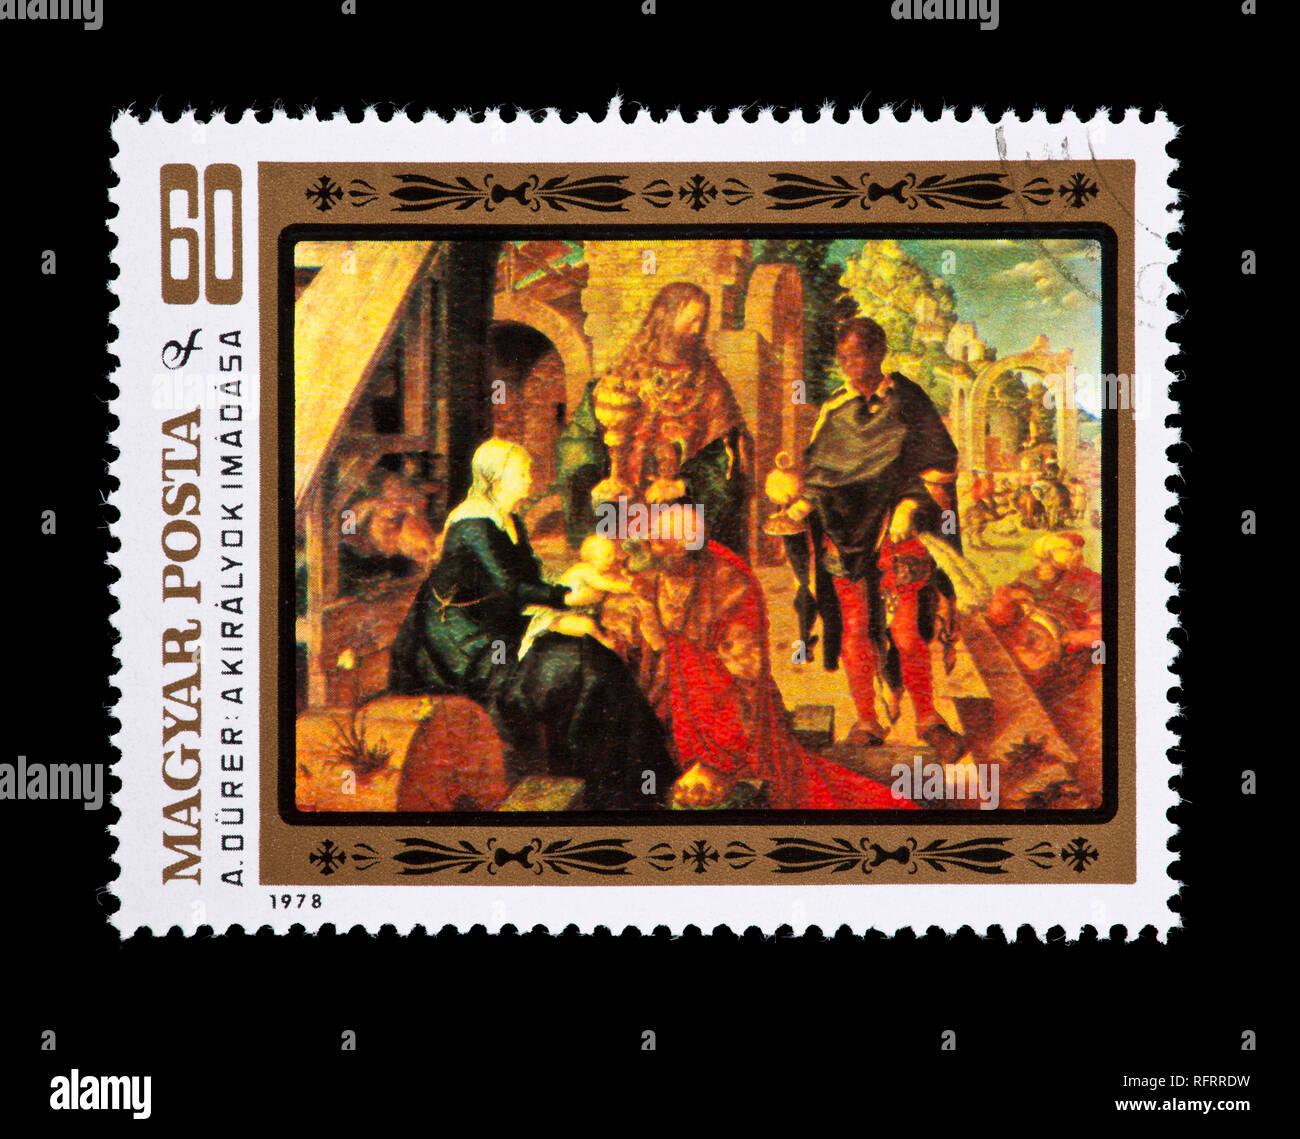 Postage stamp from Hungary depicting the Albrecht Durer painting Adoration of the Kings Stock Photo